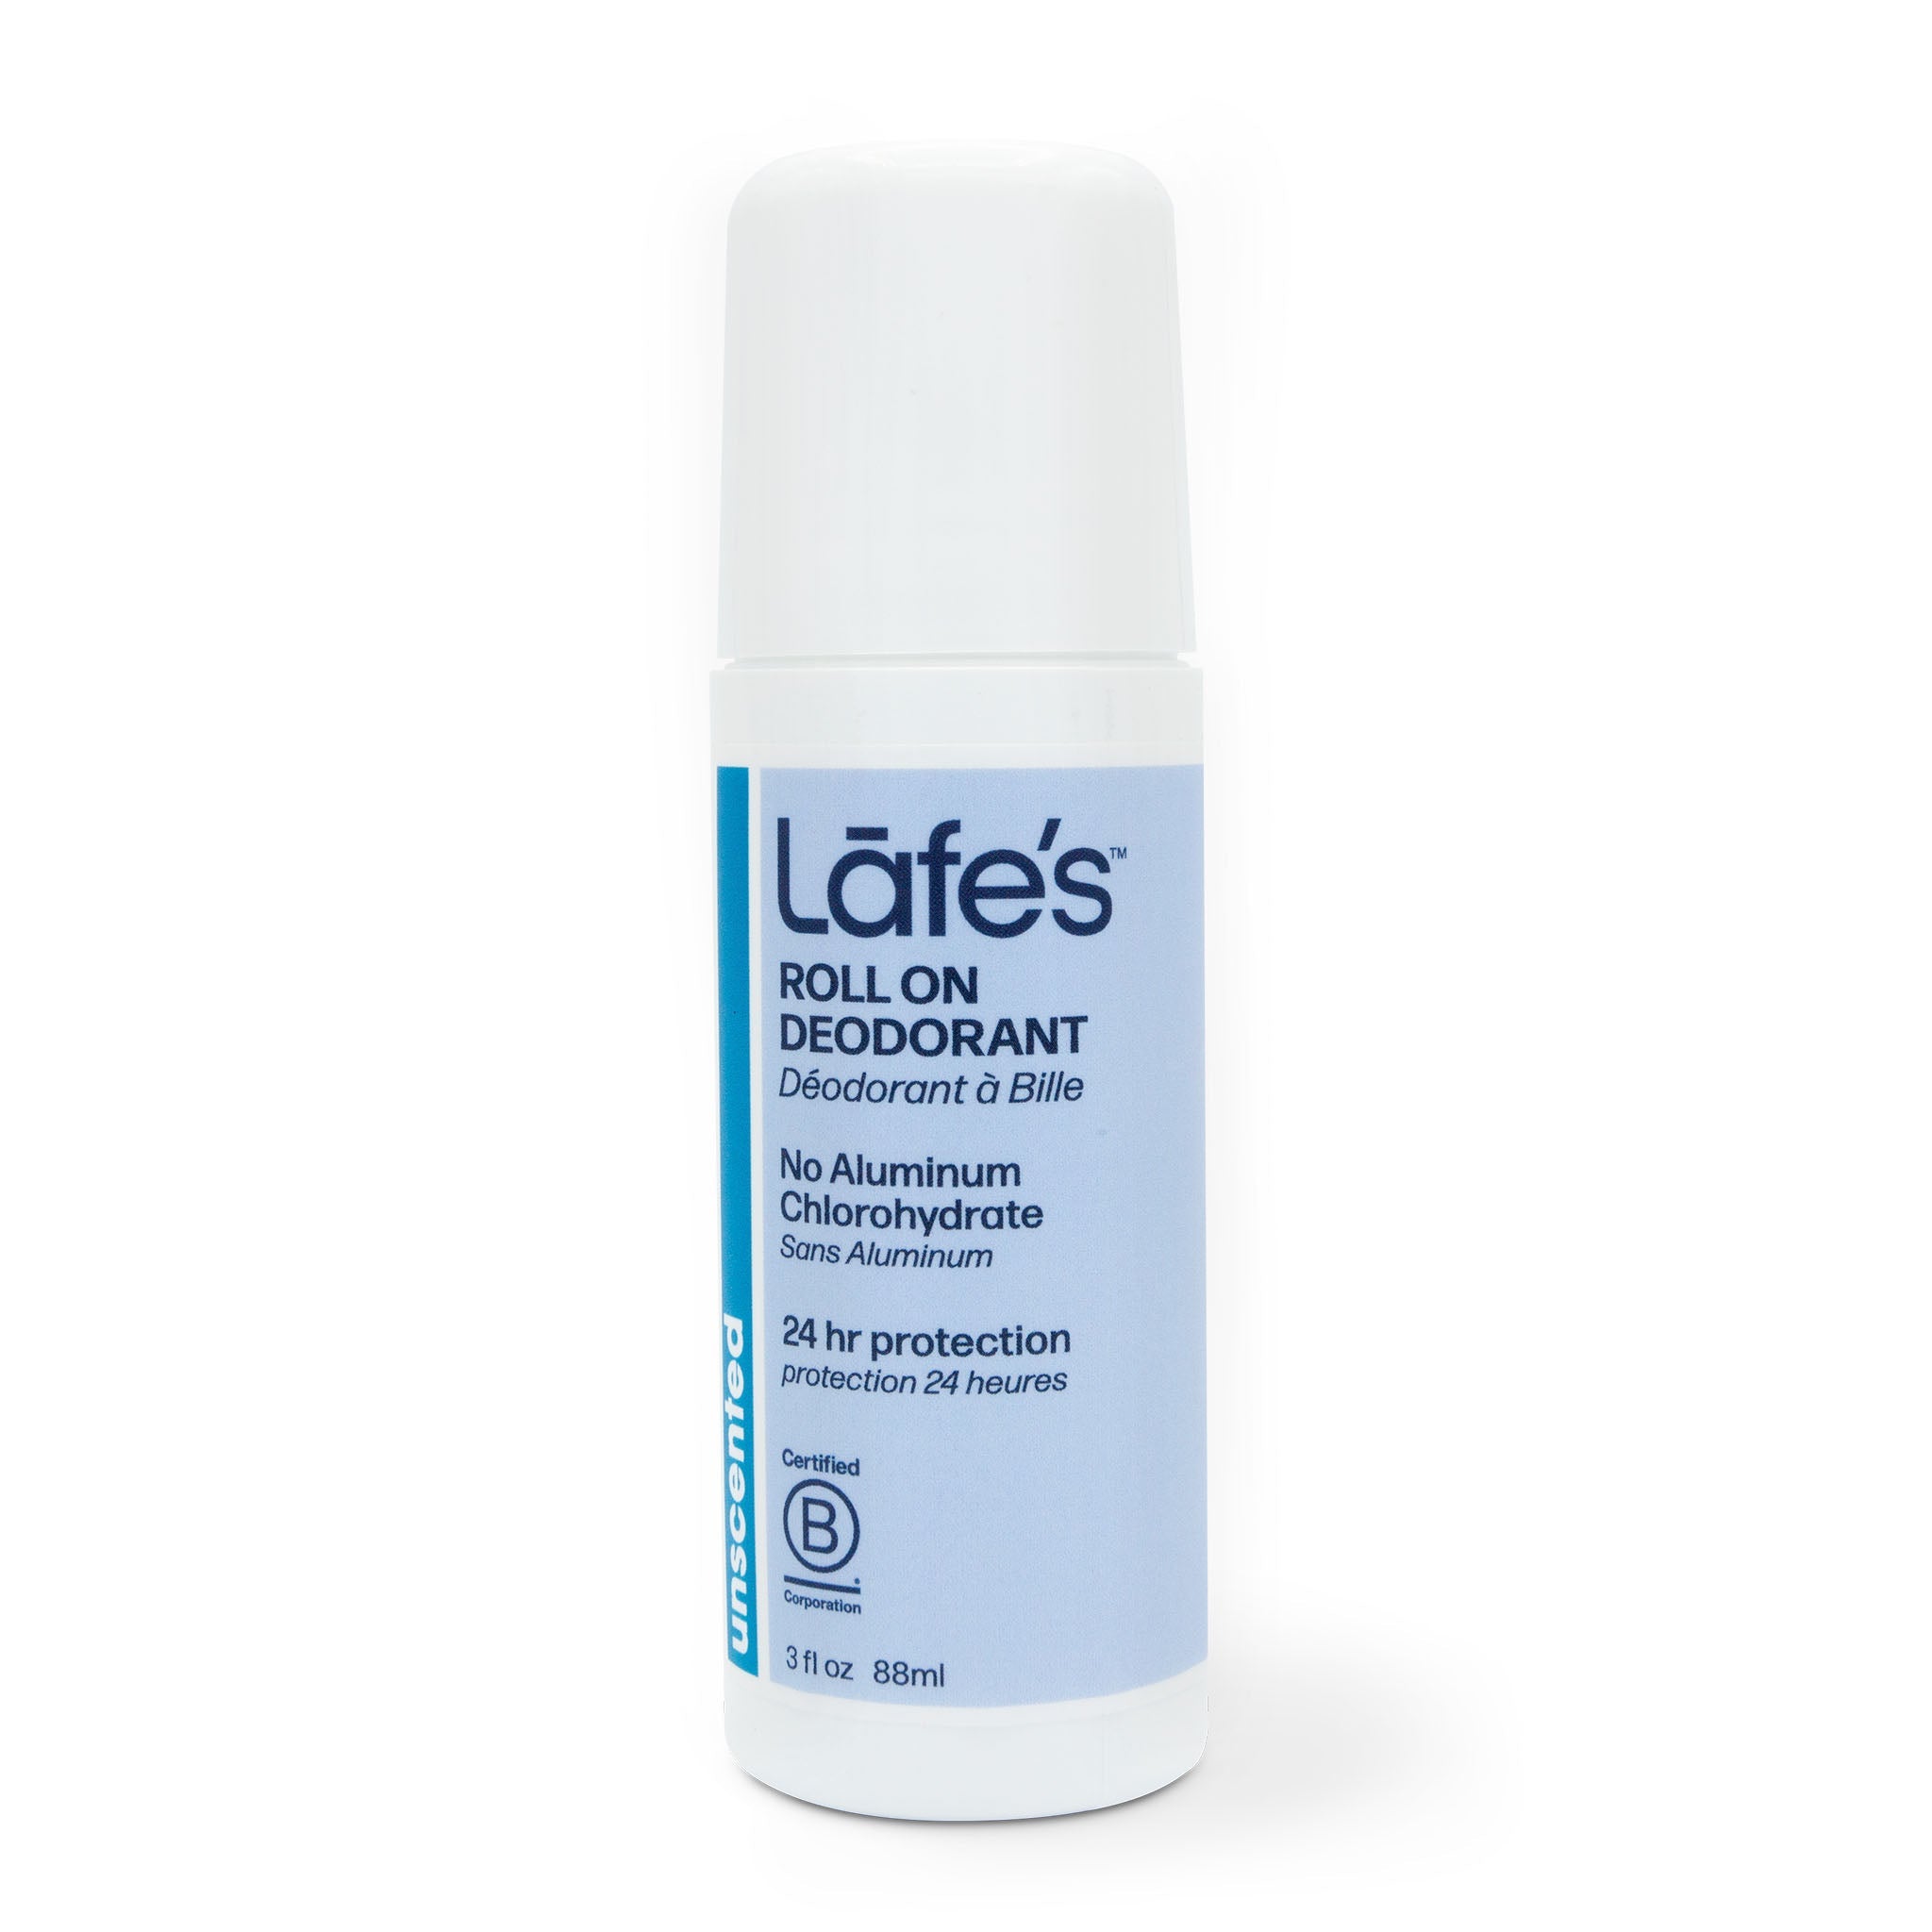 Lafe's Unscented Roll On Deodorant 88ml